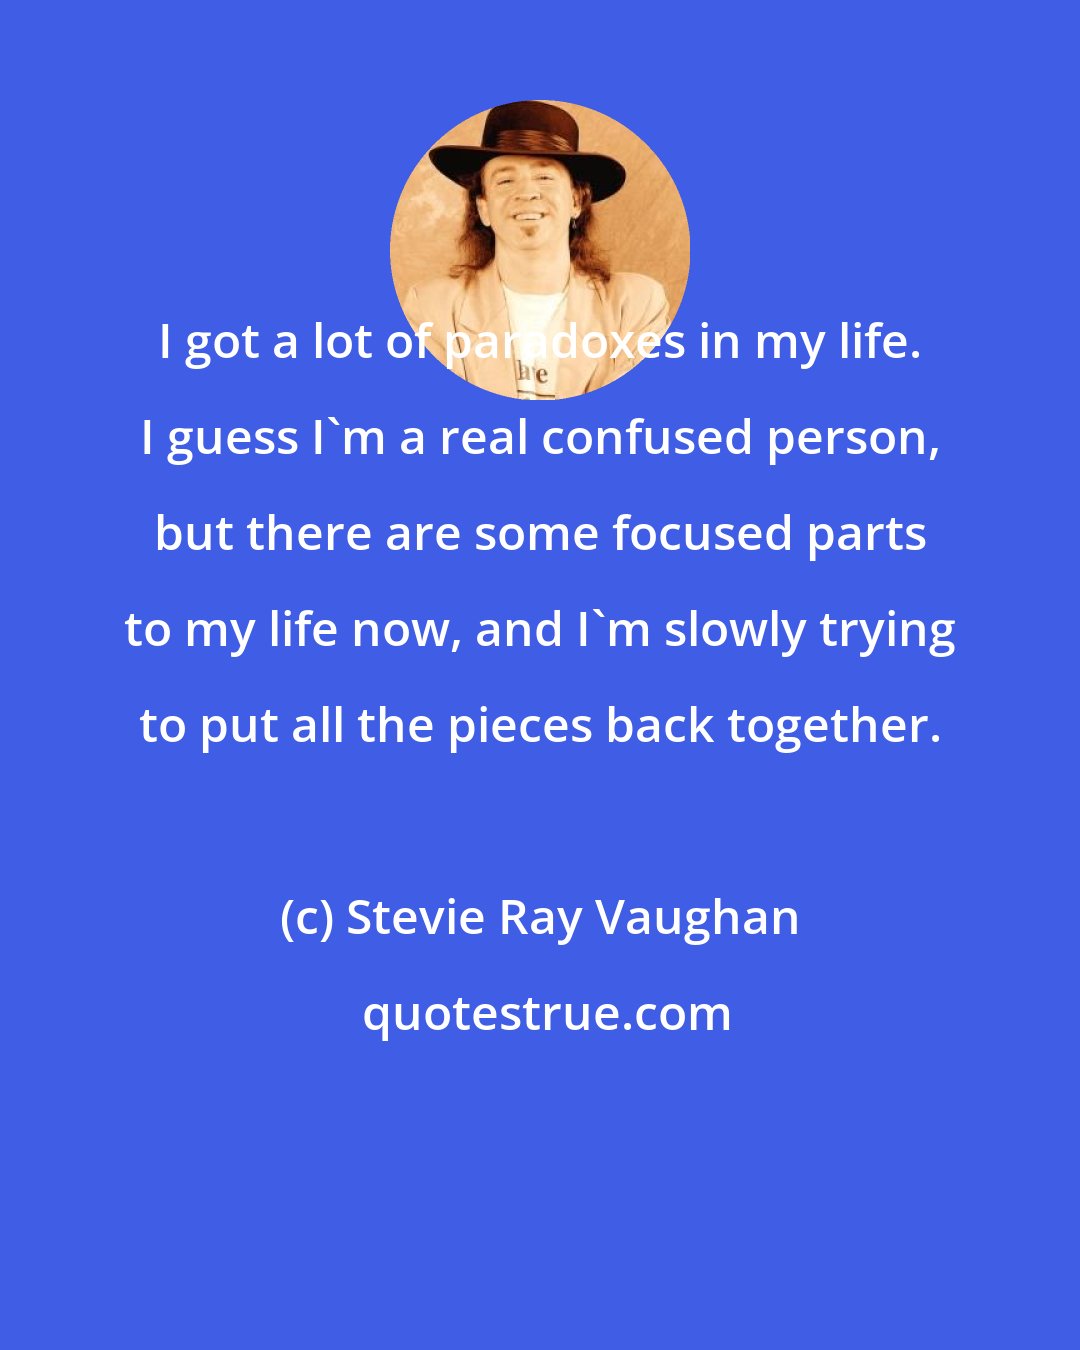 Stevie Ray Vaughan: I got a lot of paradoxes in my life. I guess I'm a real confused person, but there are some focused parts to my life now, and I'm slowly trying to put all the pieces back together.